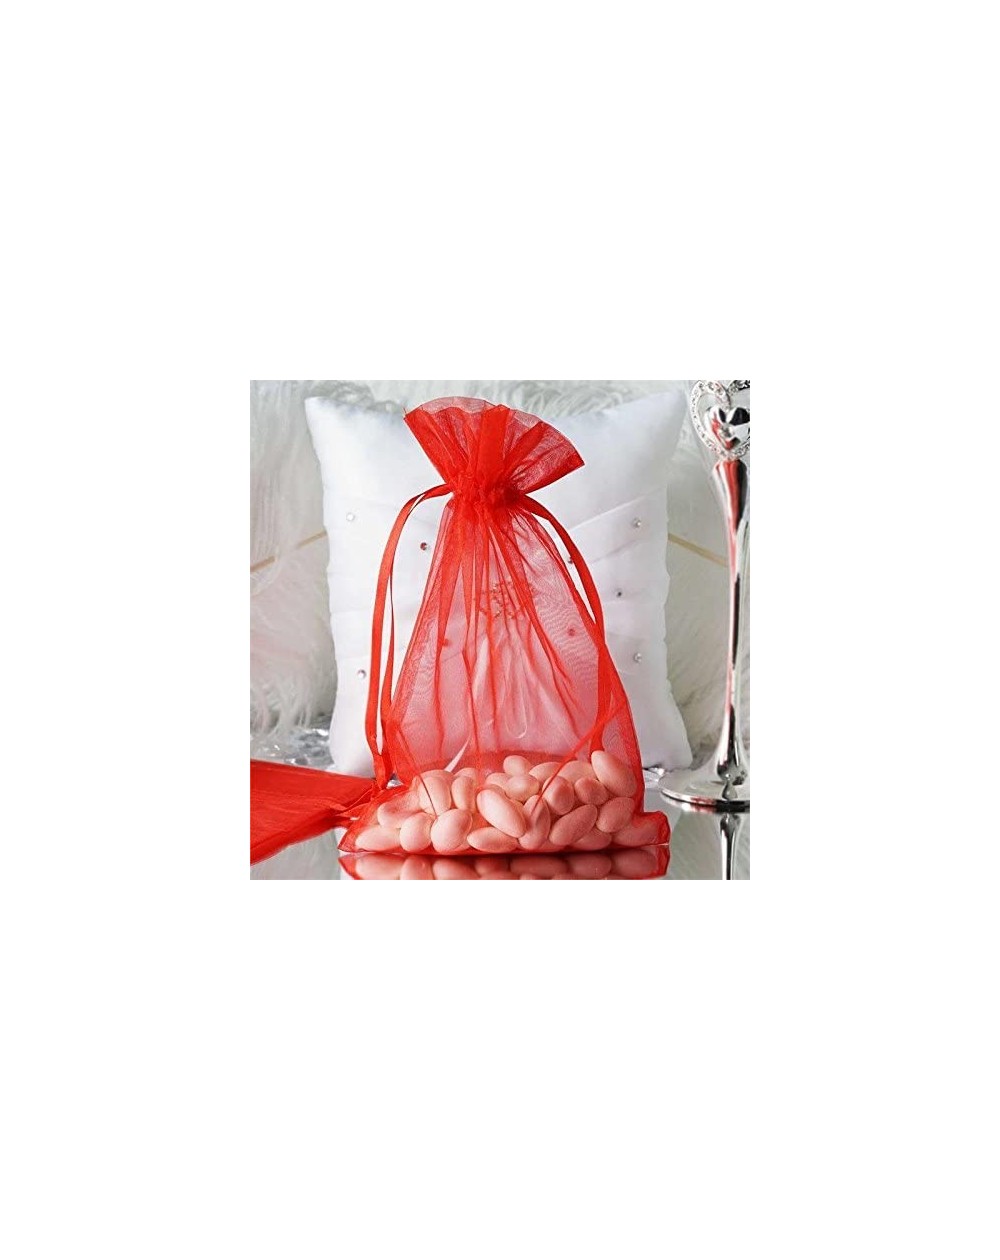 Favors 60 pcs 6x9 inch Red Organza Favor Bags - Wedding Party Favors Jewelry Pouch Candy Gift Small Bags - Red - C019DG4NA80 ...